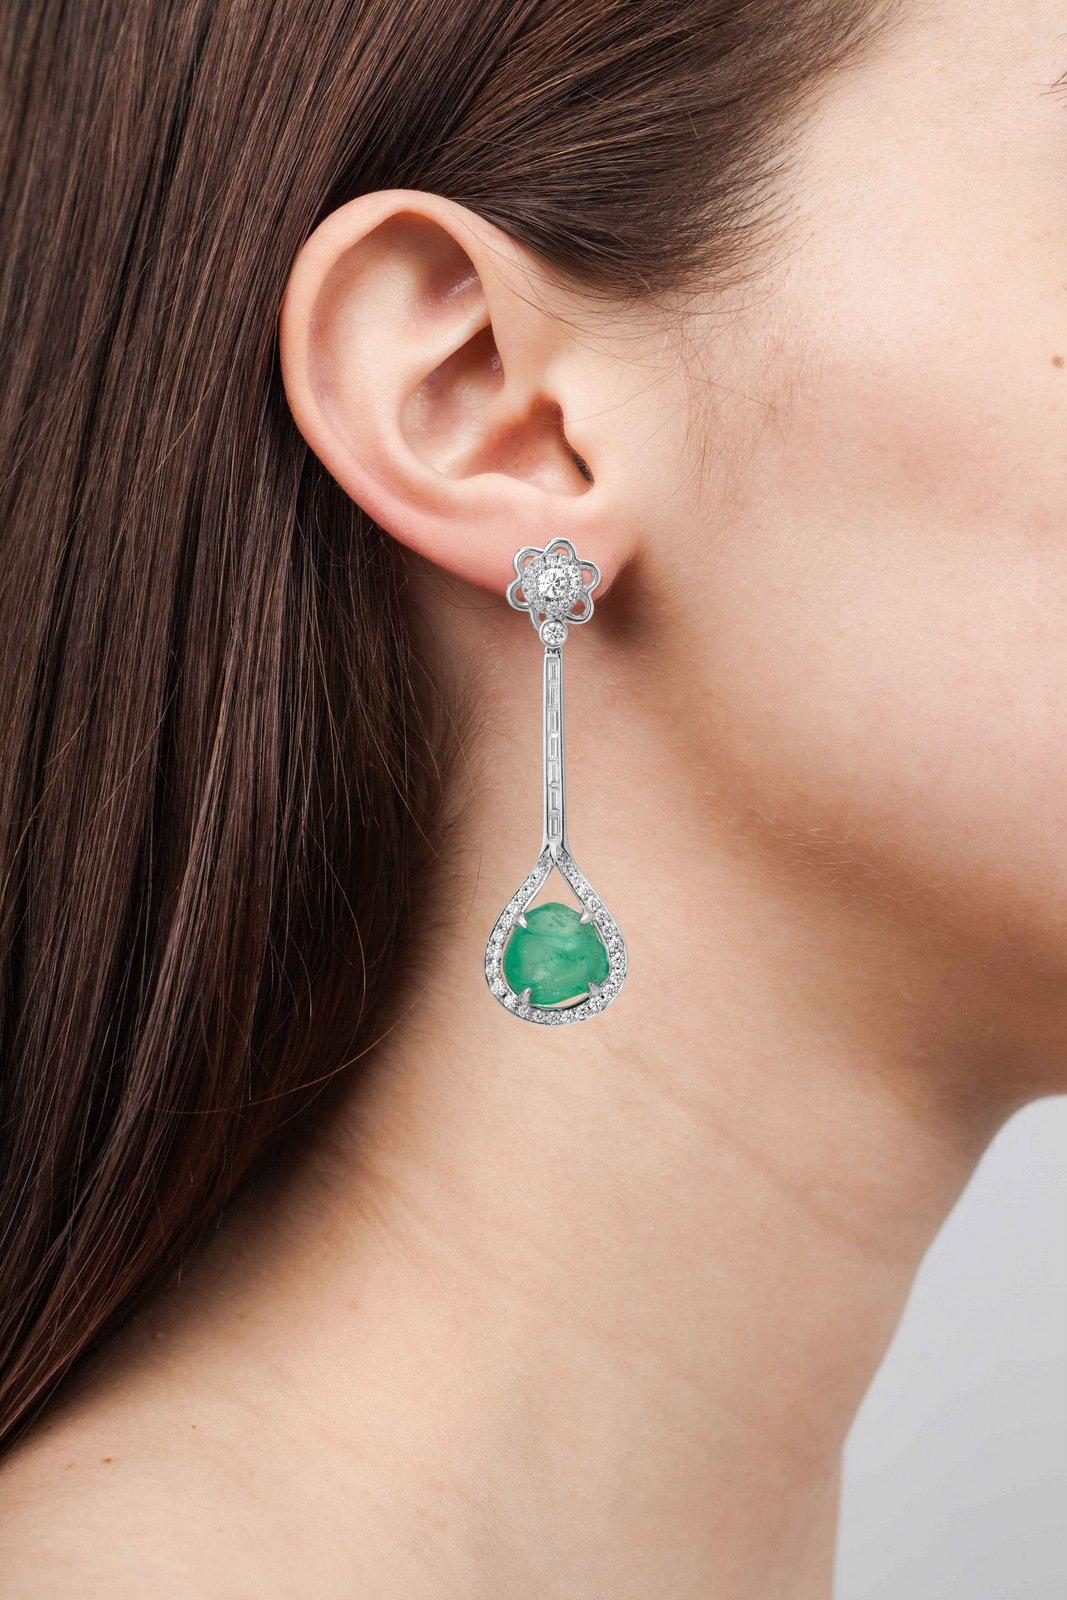 Muzo Emerald Colombia Heritage Verity Earrings set with 16.46 carats Emerald

Verity is a tribute to the trade between the Spaniards and Indian Maharajahs, two unique cultures that share a passion for gilded treasures and precious emerald gemstones.